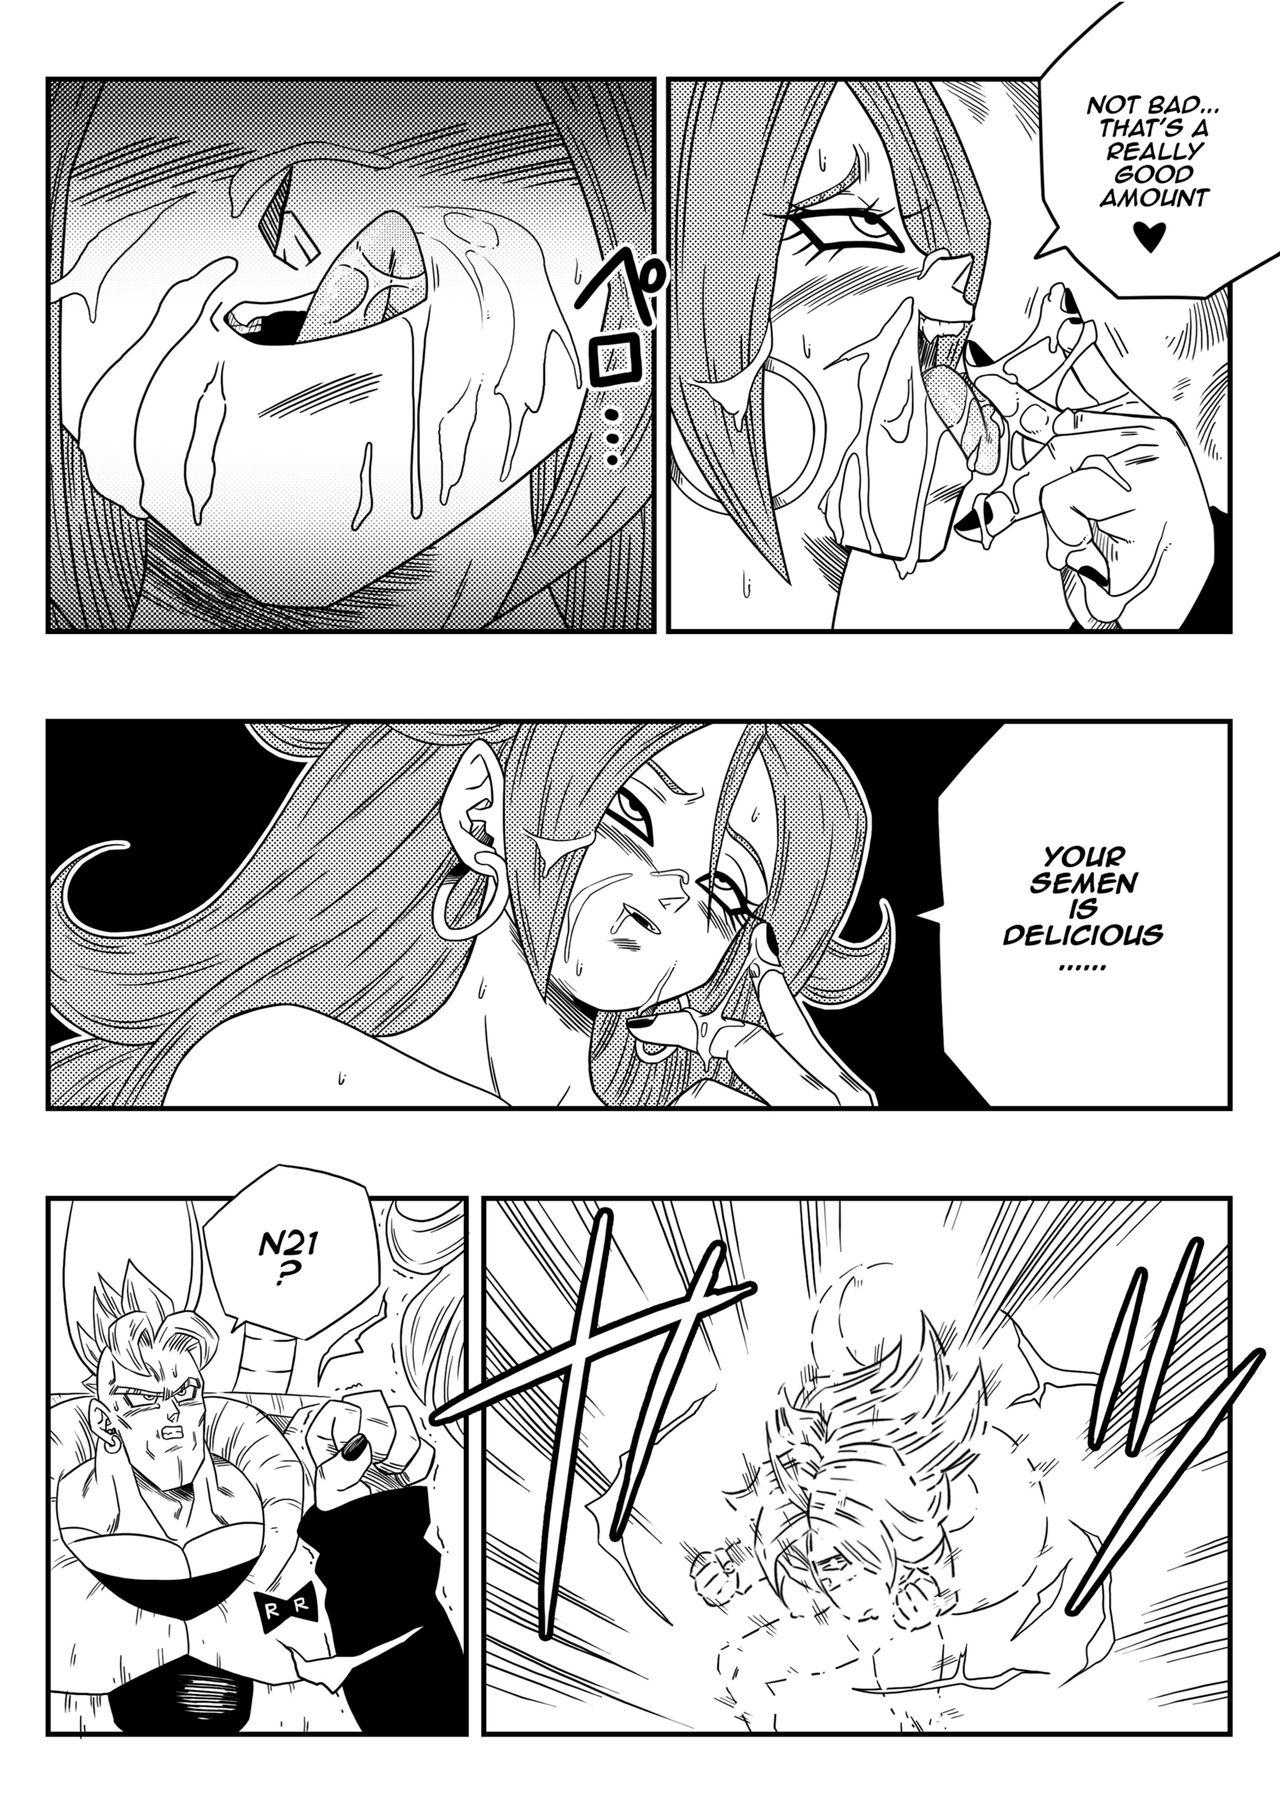 Hardsex Kyonyuu Android Sekai Seiha o Netsubou!! Android 21 Shutsugen!! | Busty Android Wants to Dominate the World! - Dragon ball Thot - Page 9